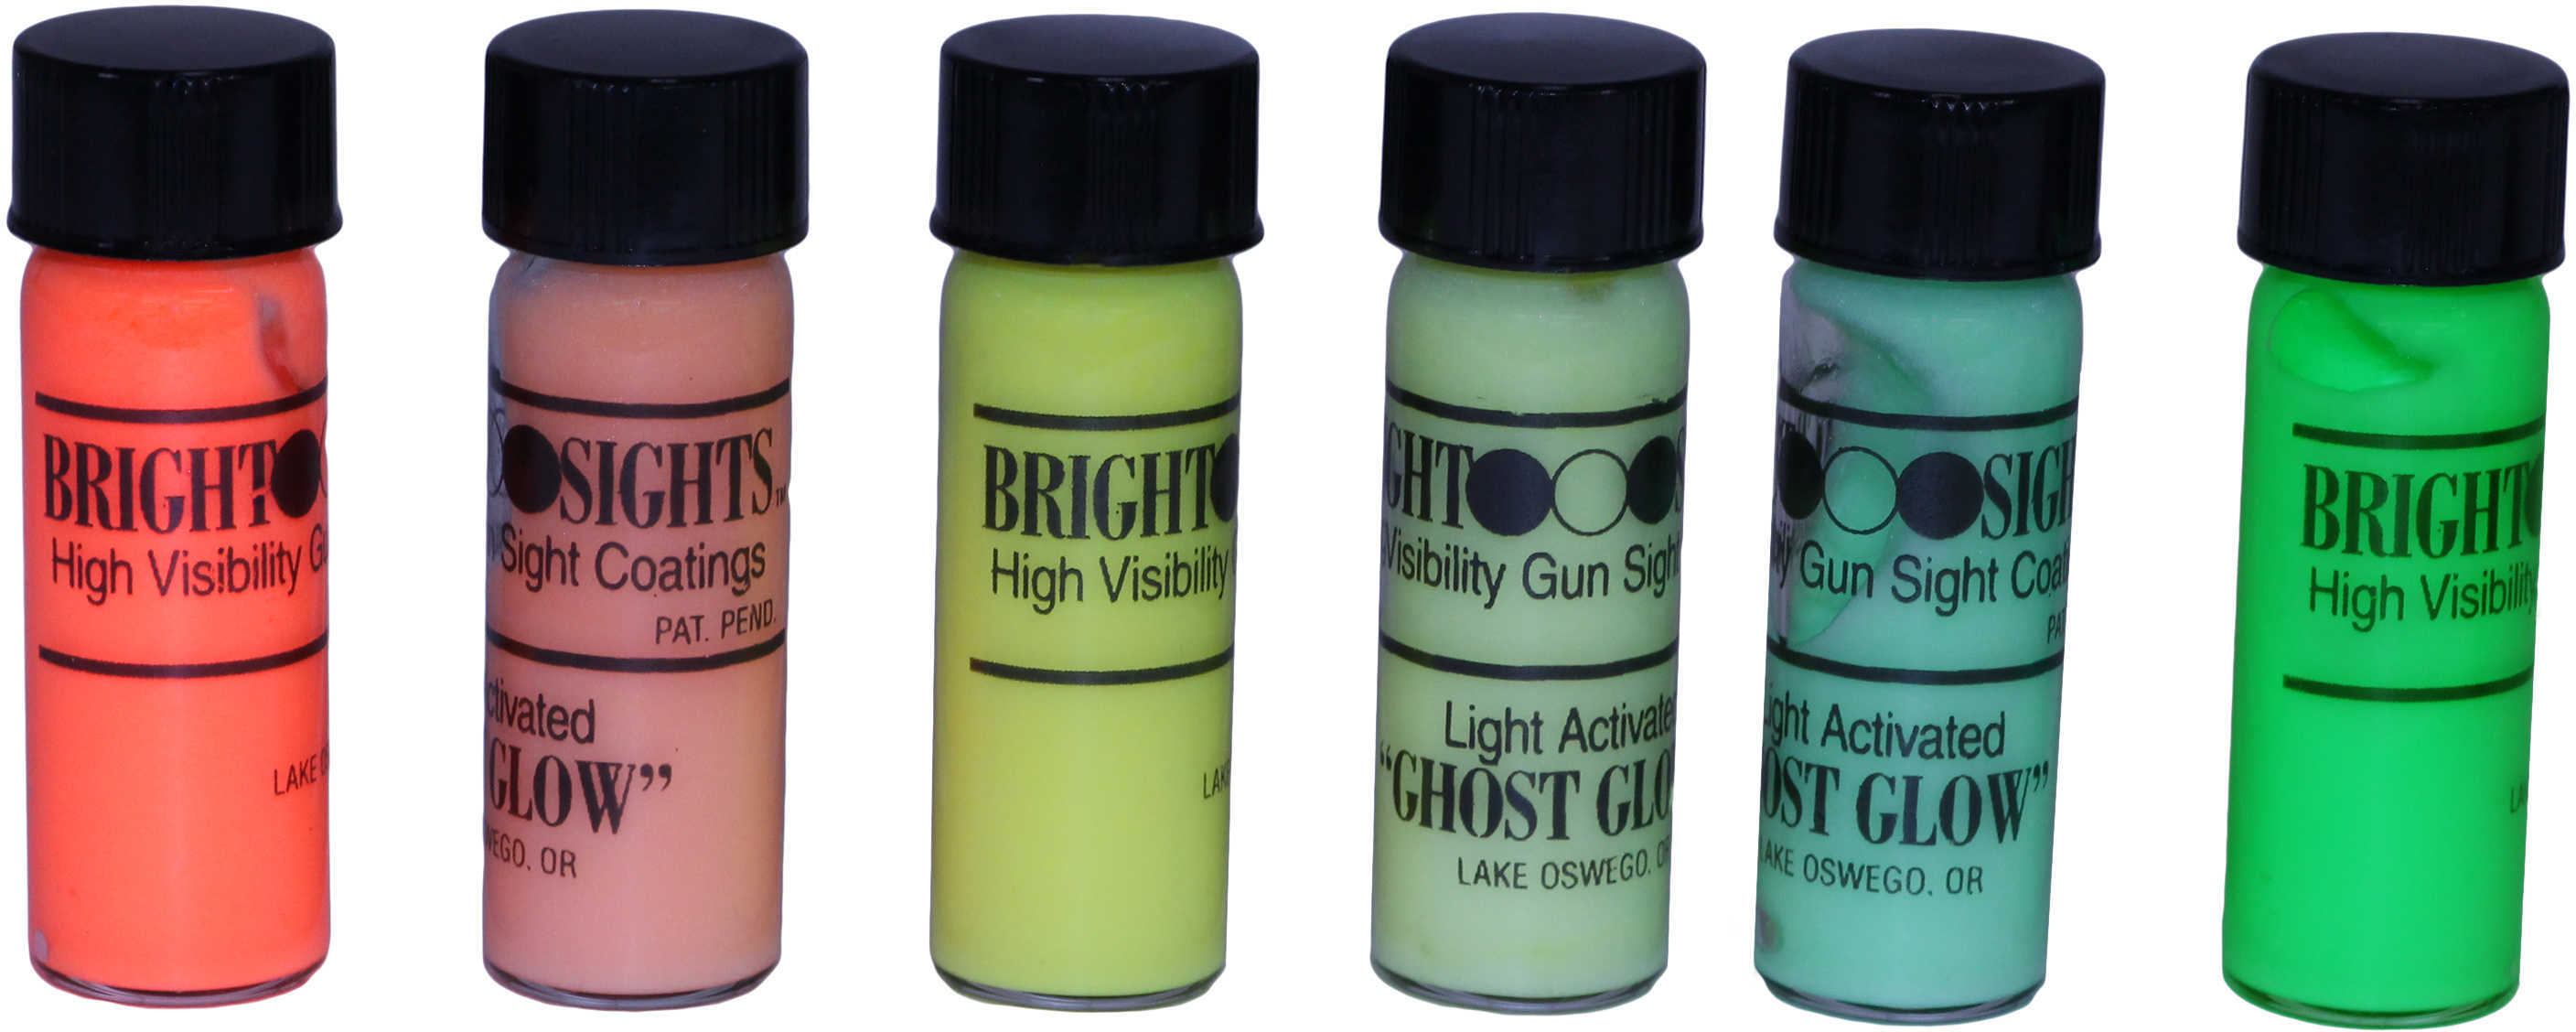 Truglo Paint Ghost Glow Kit Md: TG985B